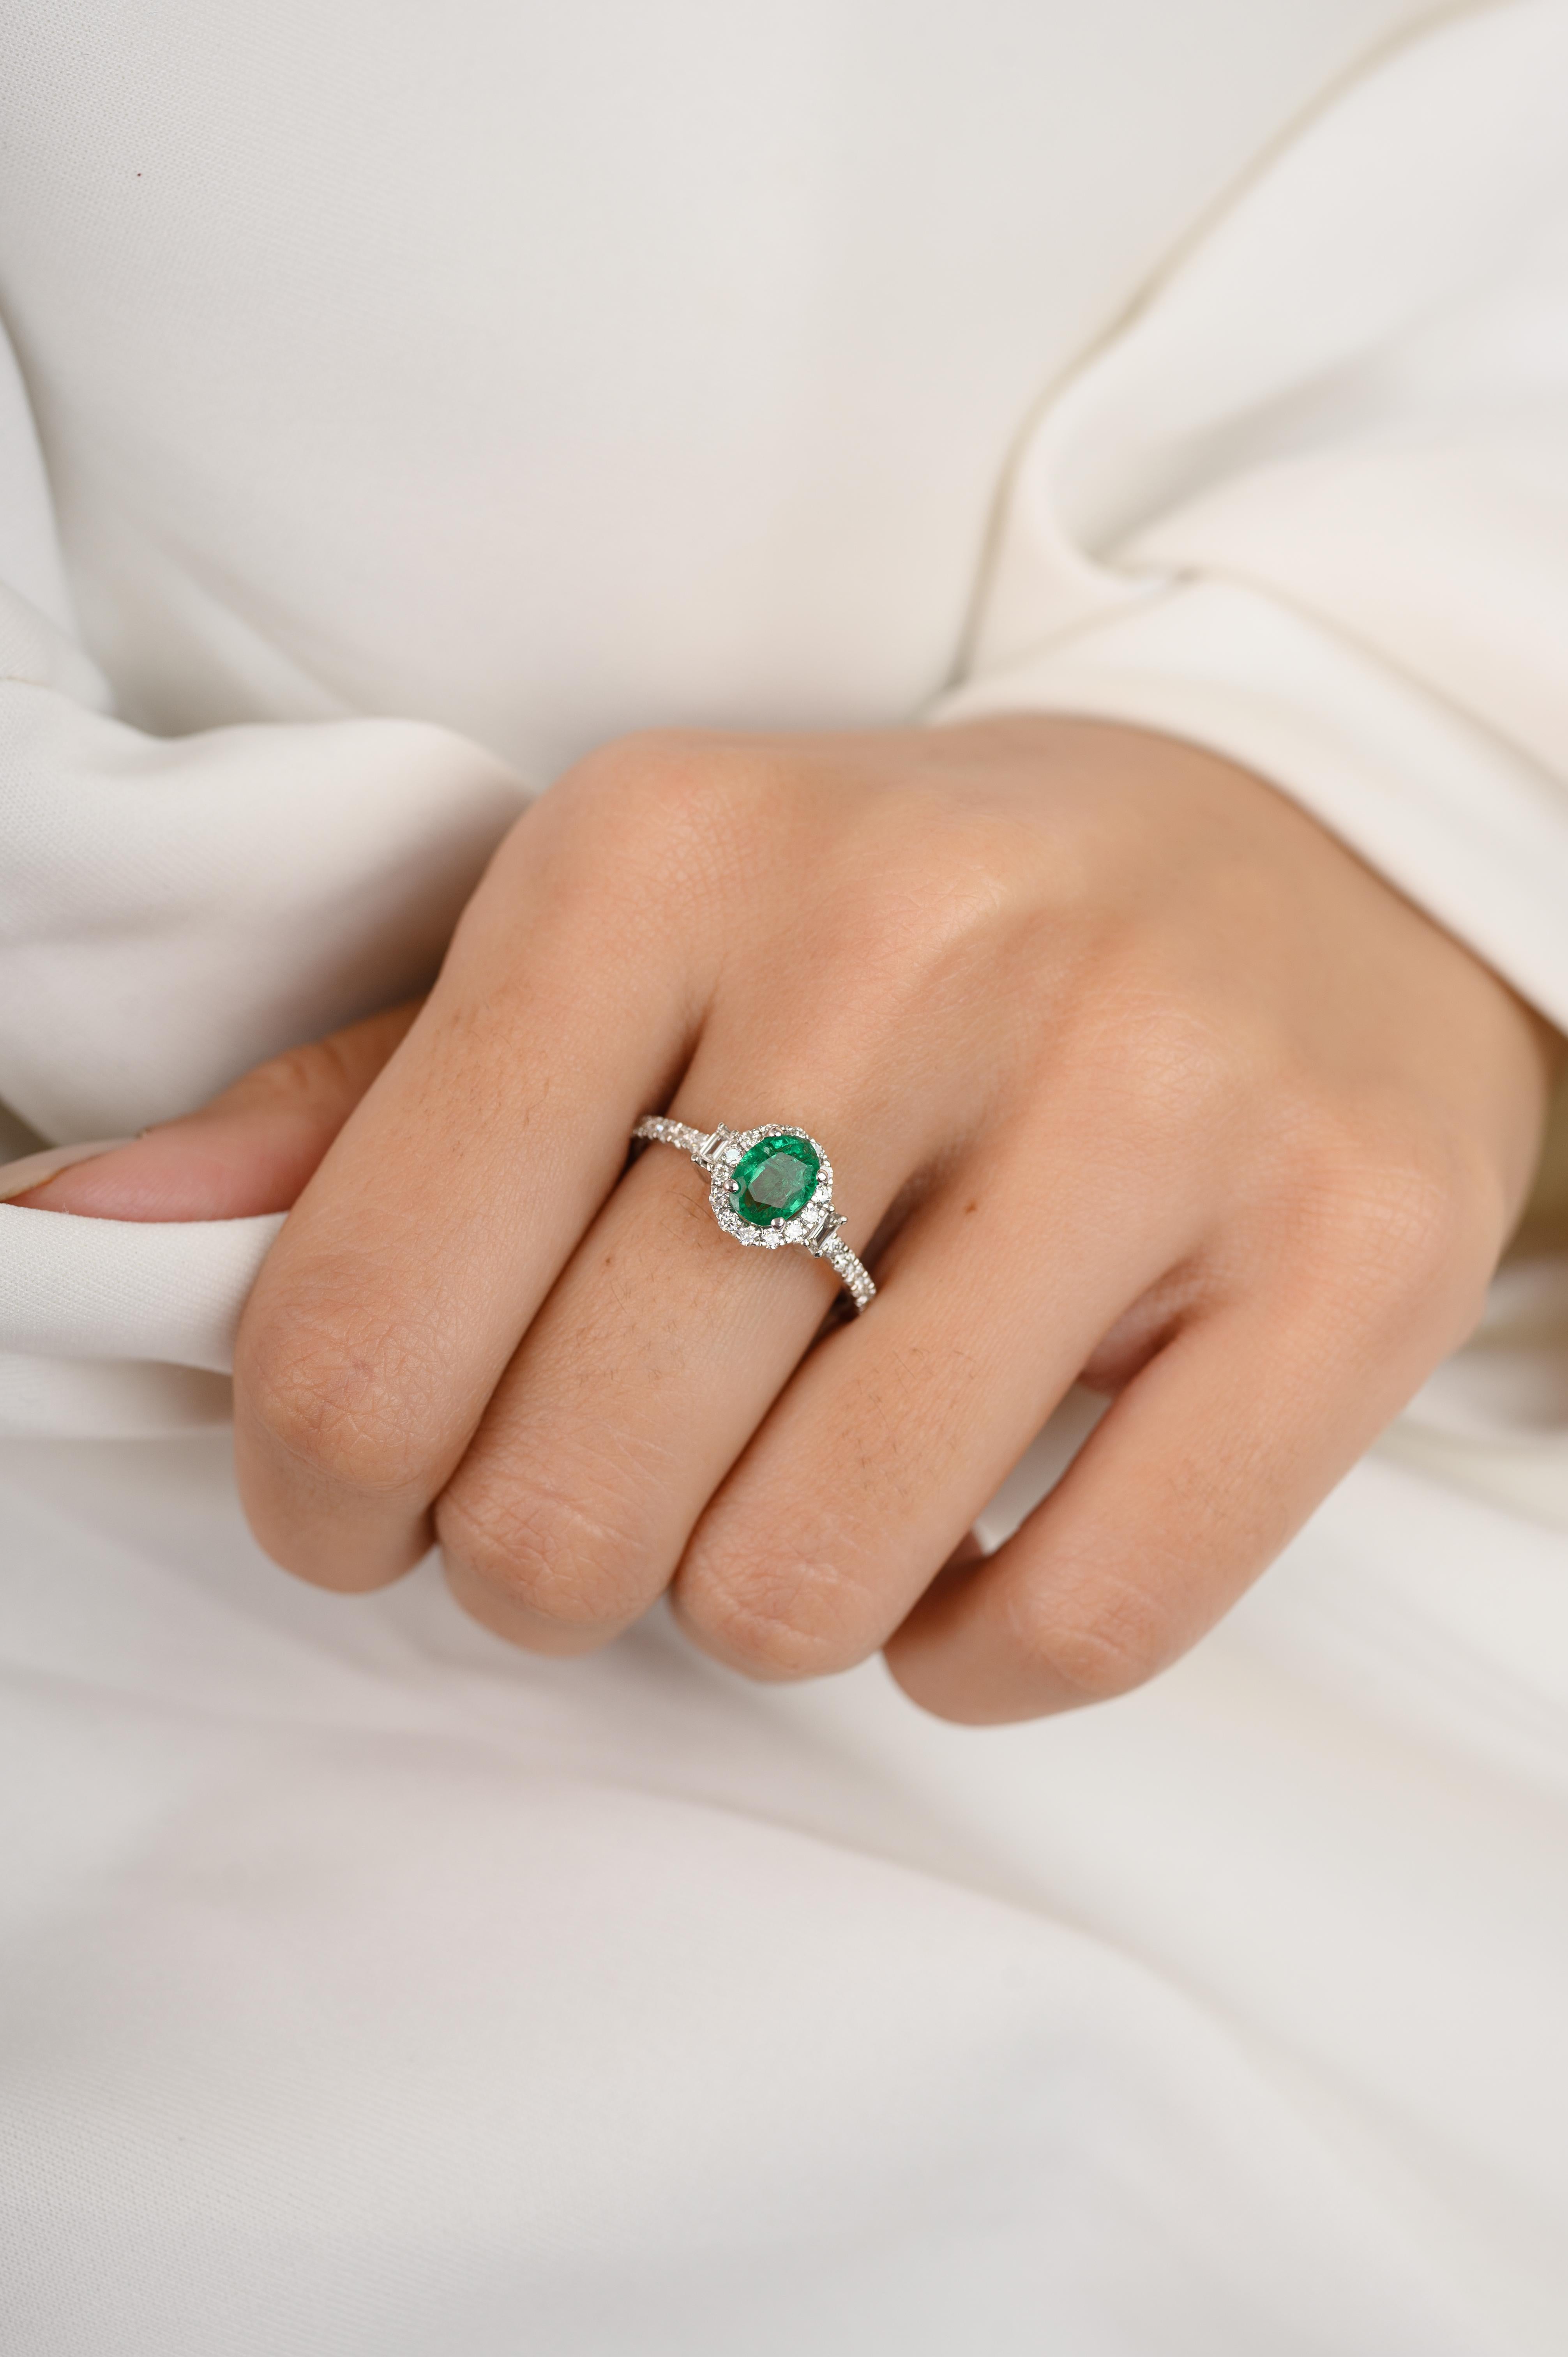 For Sale:  18 Karat White Gold Diamond Halo Emerald Engagement Ring for Her 6